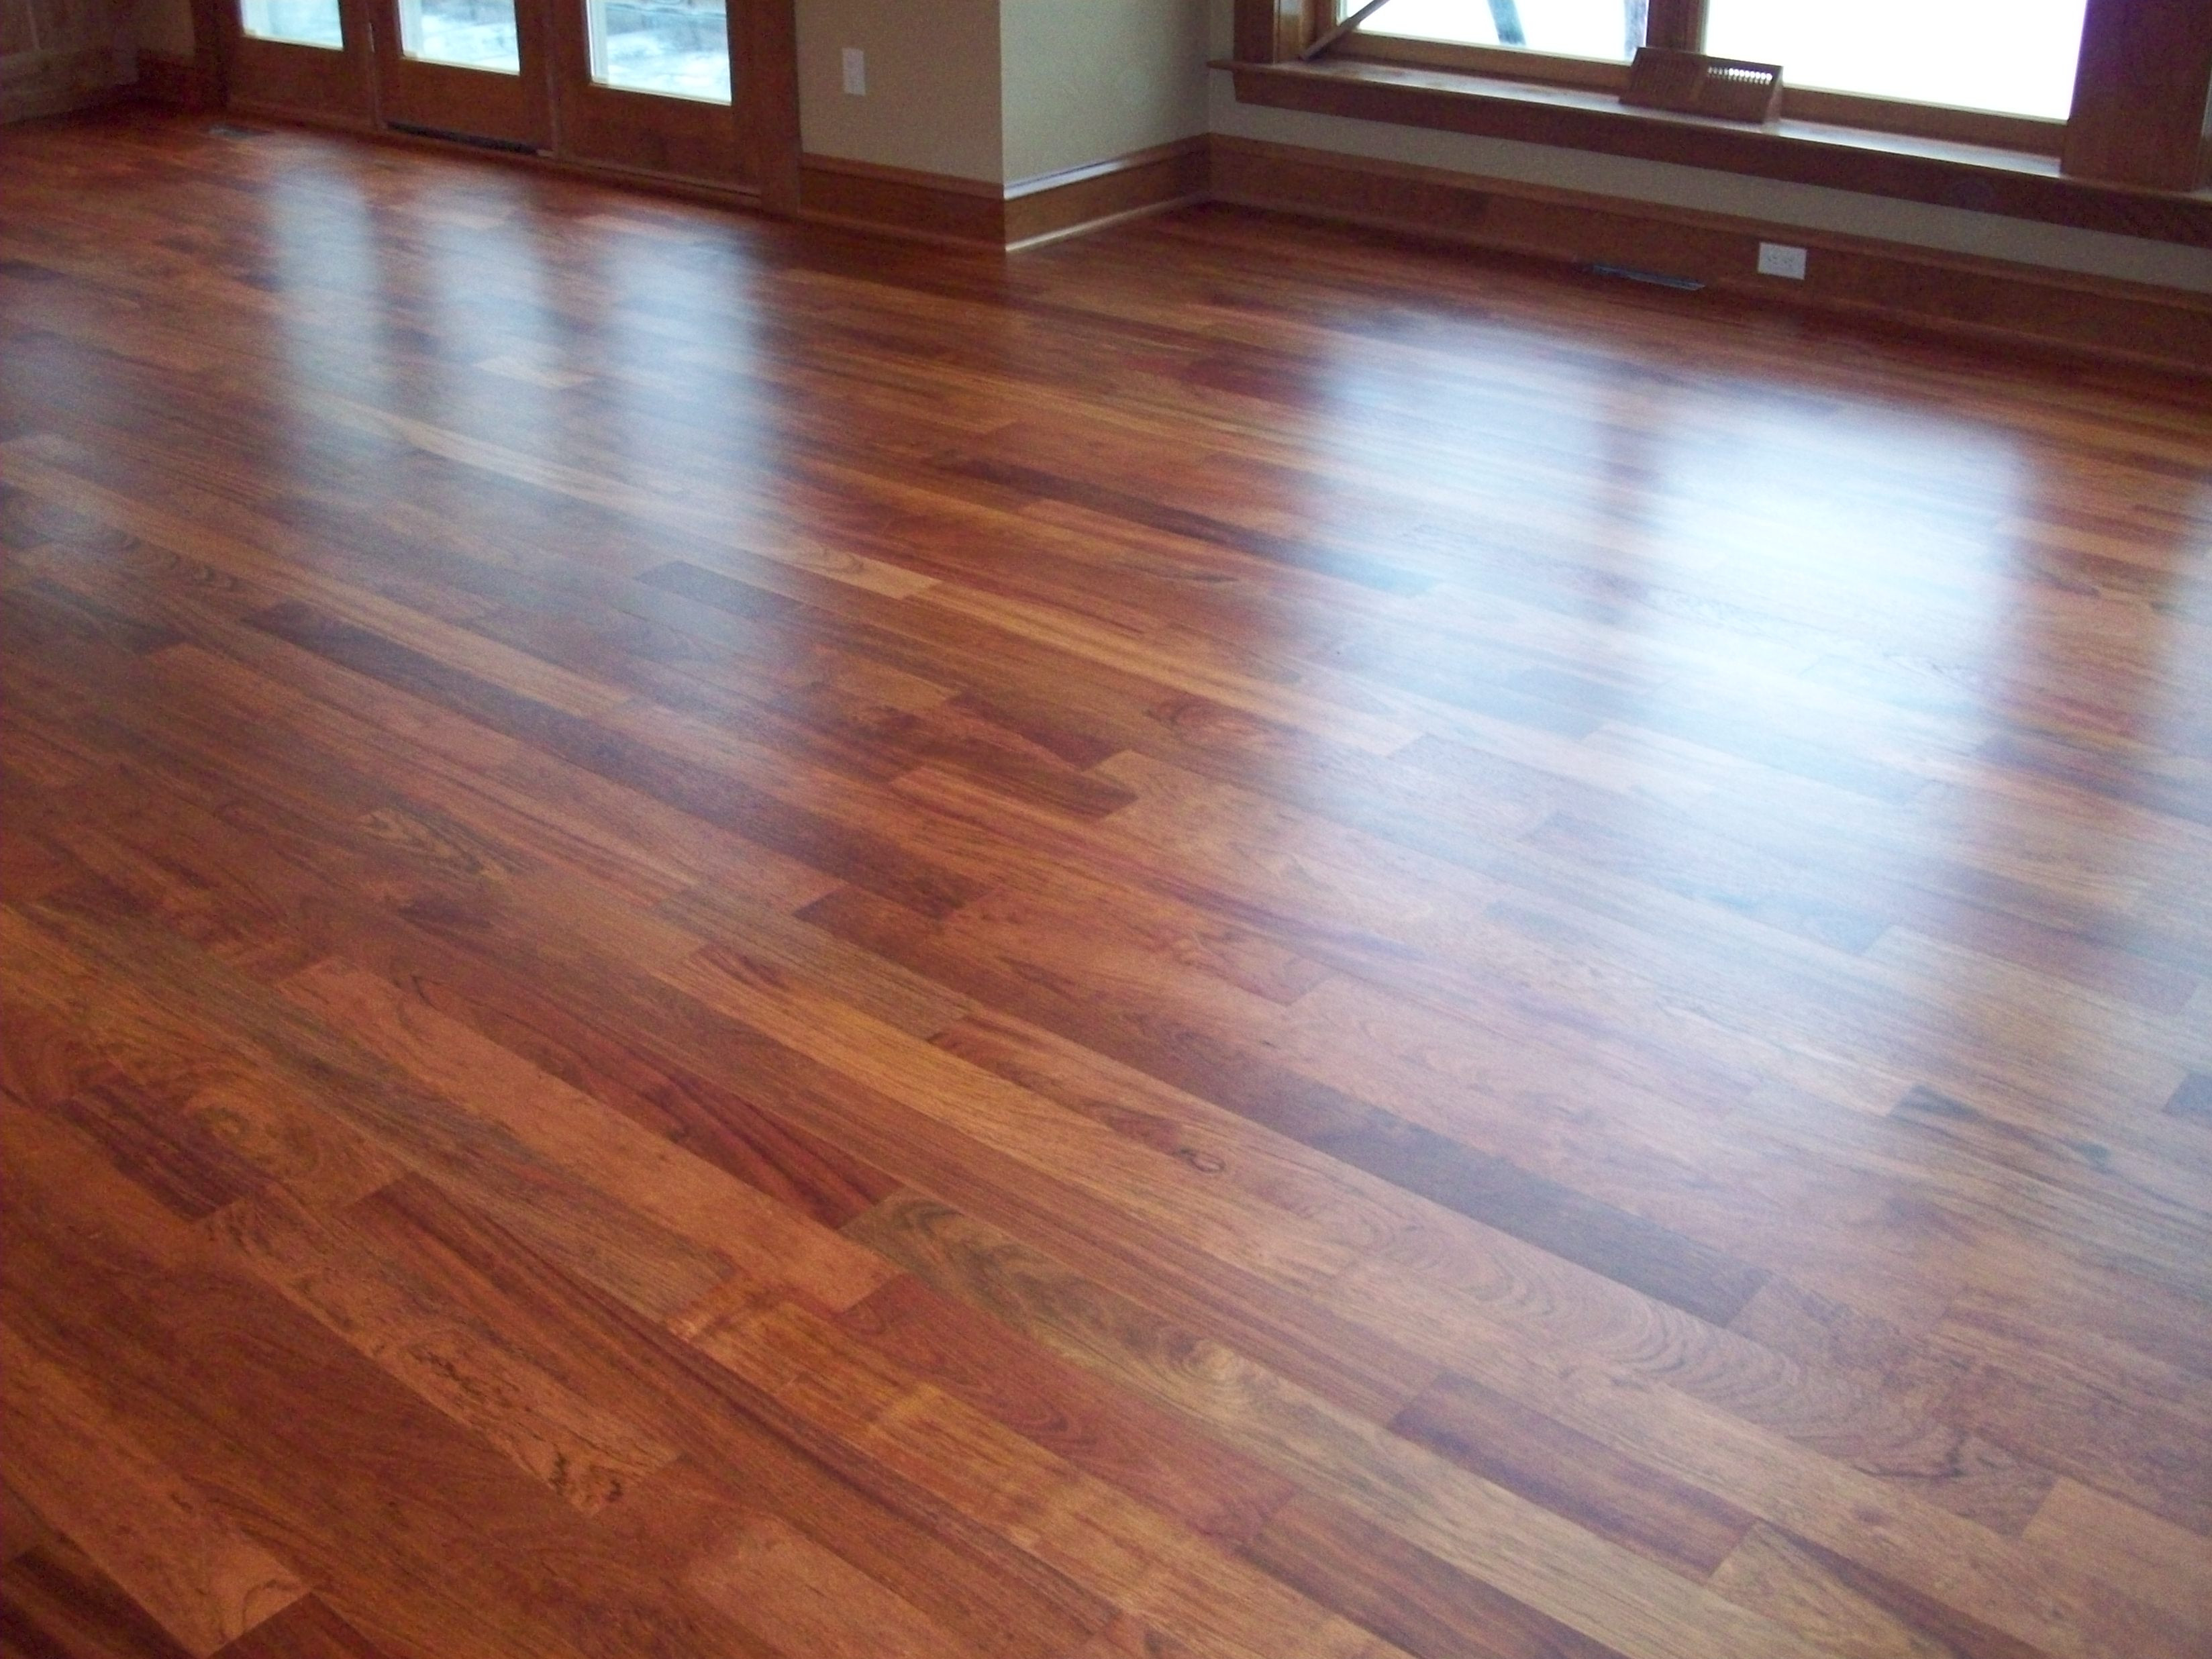 21 Great Hardwood Flooring for Sale Near Me 2024 free download hardwood flooring for sale near me of forest accents wood floor inspirational engaging discount hardwood in forest accents wood floor inspirational engaging discount hardwood flooring 5 wher